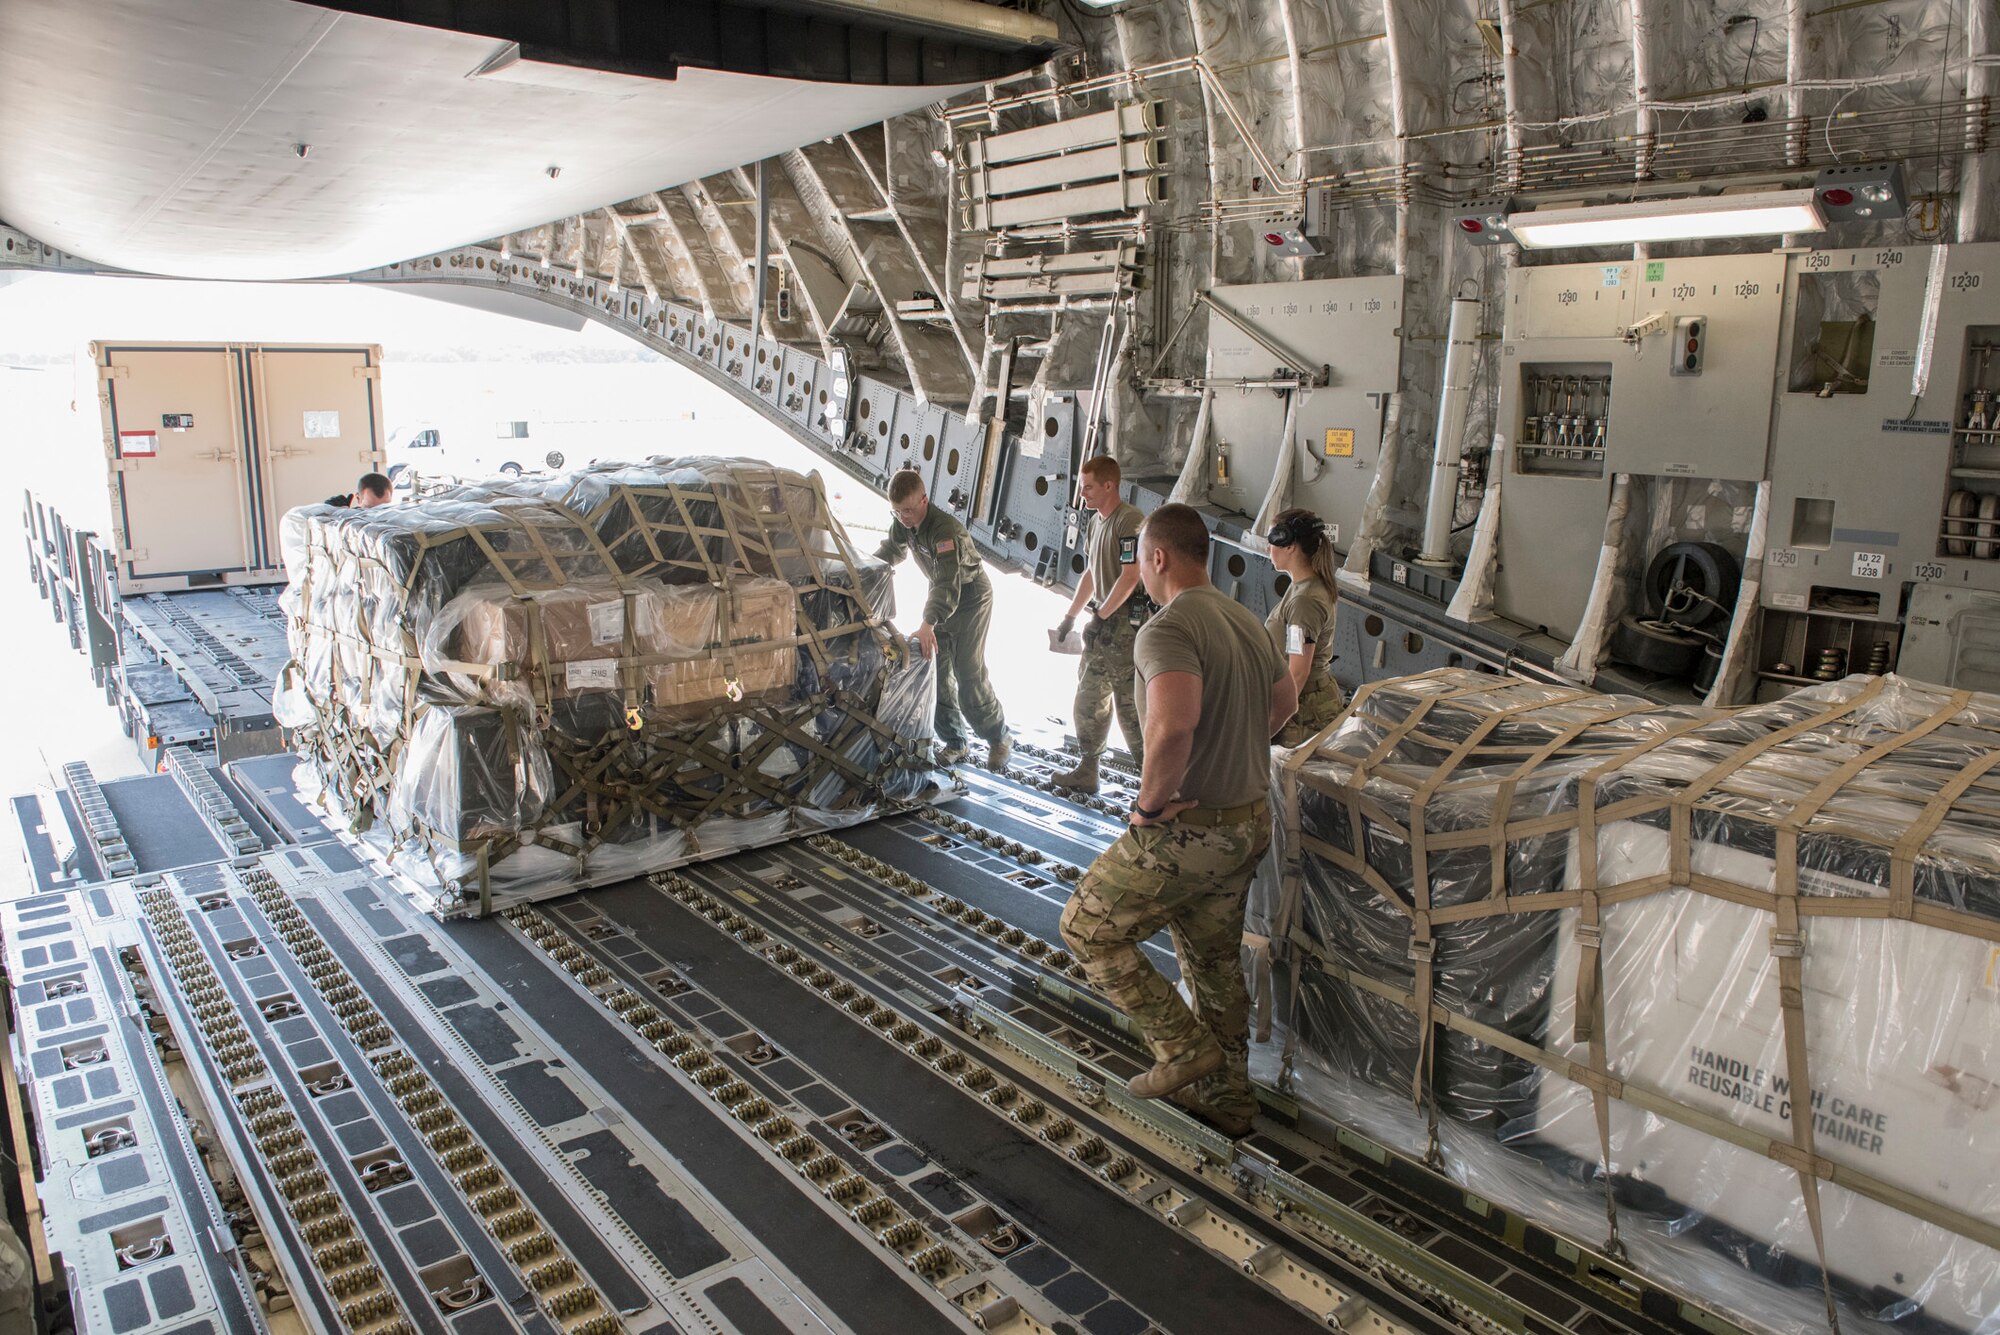 Aerial transportation specialists and loadmasters from the 167th Airlift Wing, West Virginia National Guard, and 123rd Airlift Wing, Kentucky National Guard, load palletized cargo onto a C-17 Globemaster III aircraft during a cargo loading exercise at the 167th Airlift Wing, Martinsburg, West Virginia, July 14, 2021. The 167th hosted members from the 123rd for a small air terminal training in preparation for their upcoming deployment.